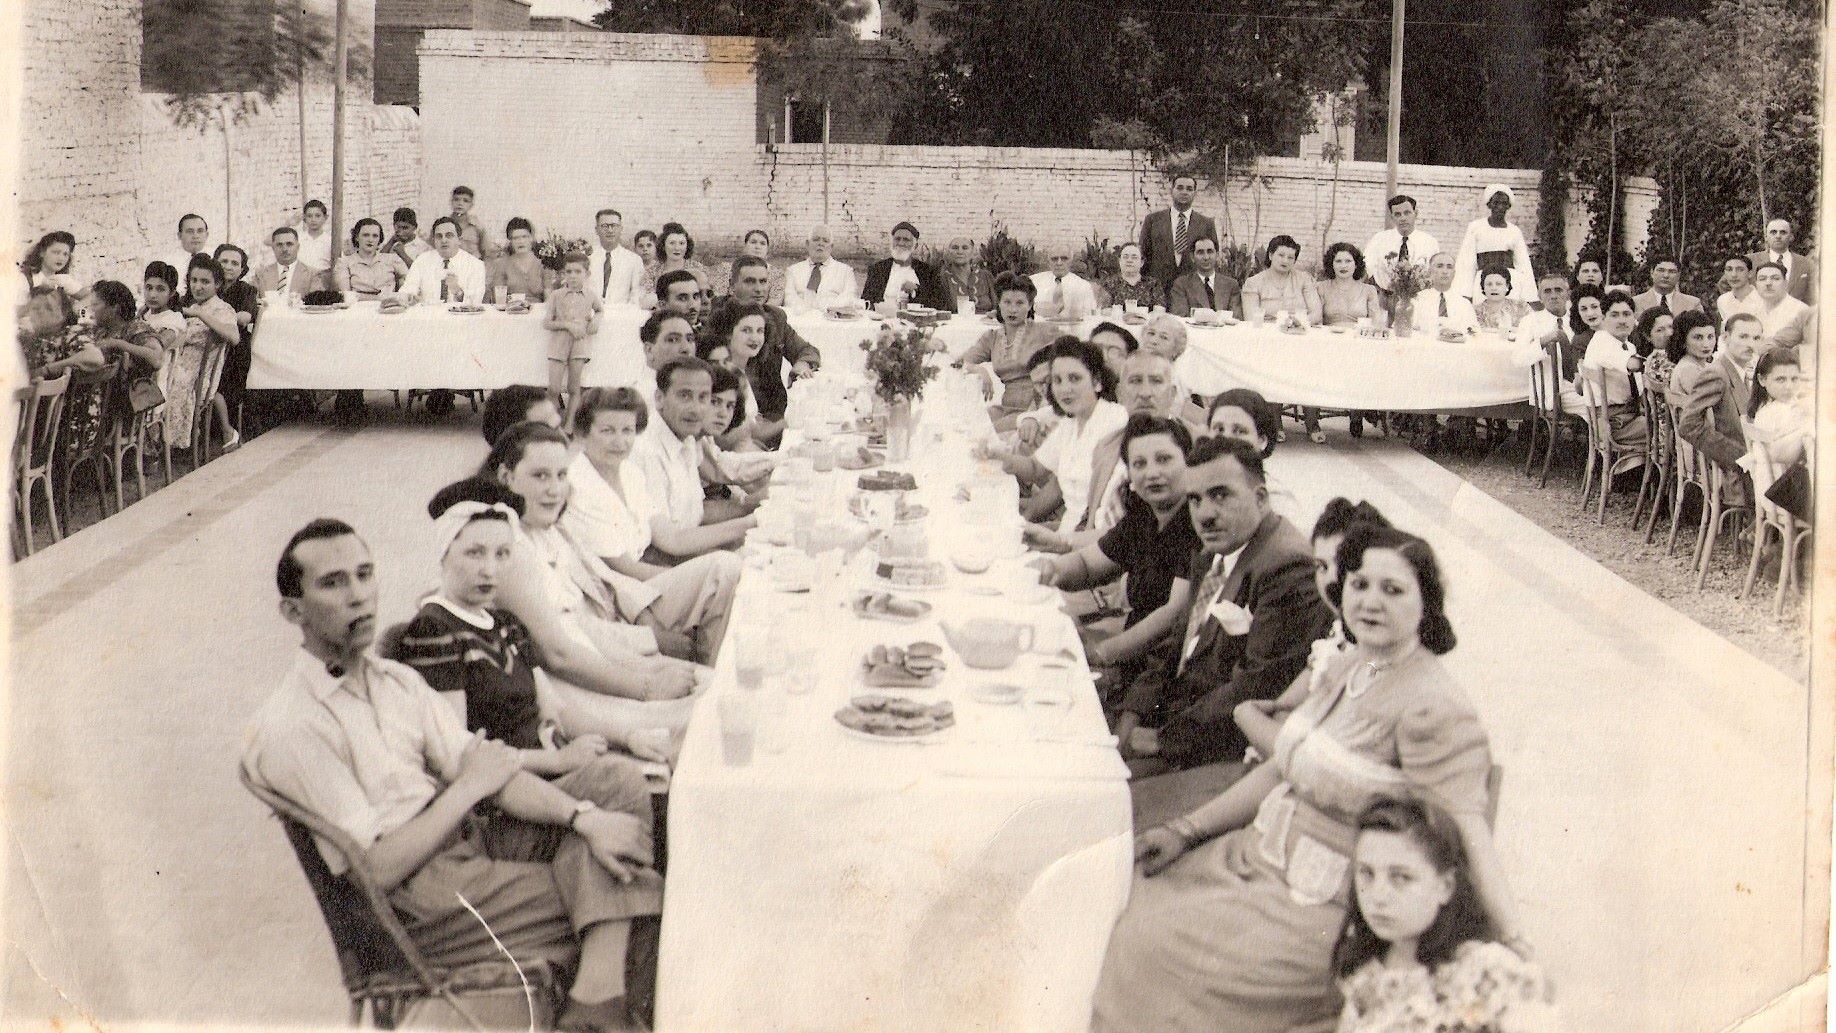 The Jewish Community of Sudan sharing a communal meal at the Jewish Recreational Club in 1947 (Tales of Jewish Sudan)